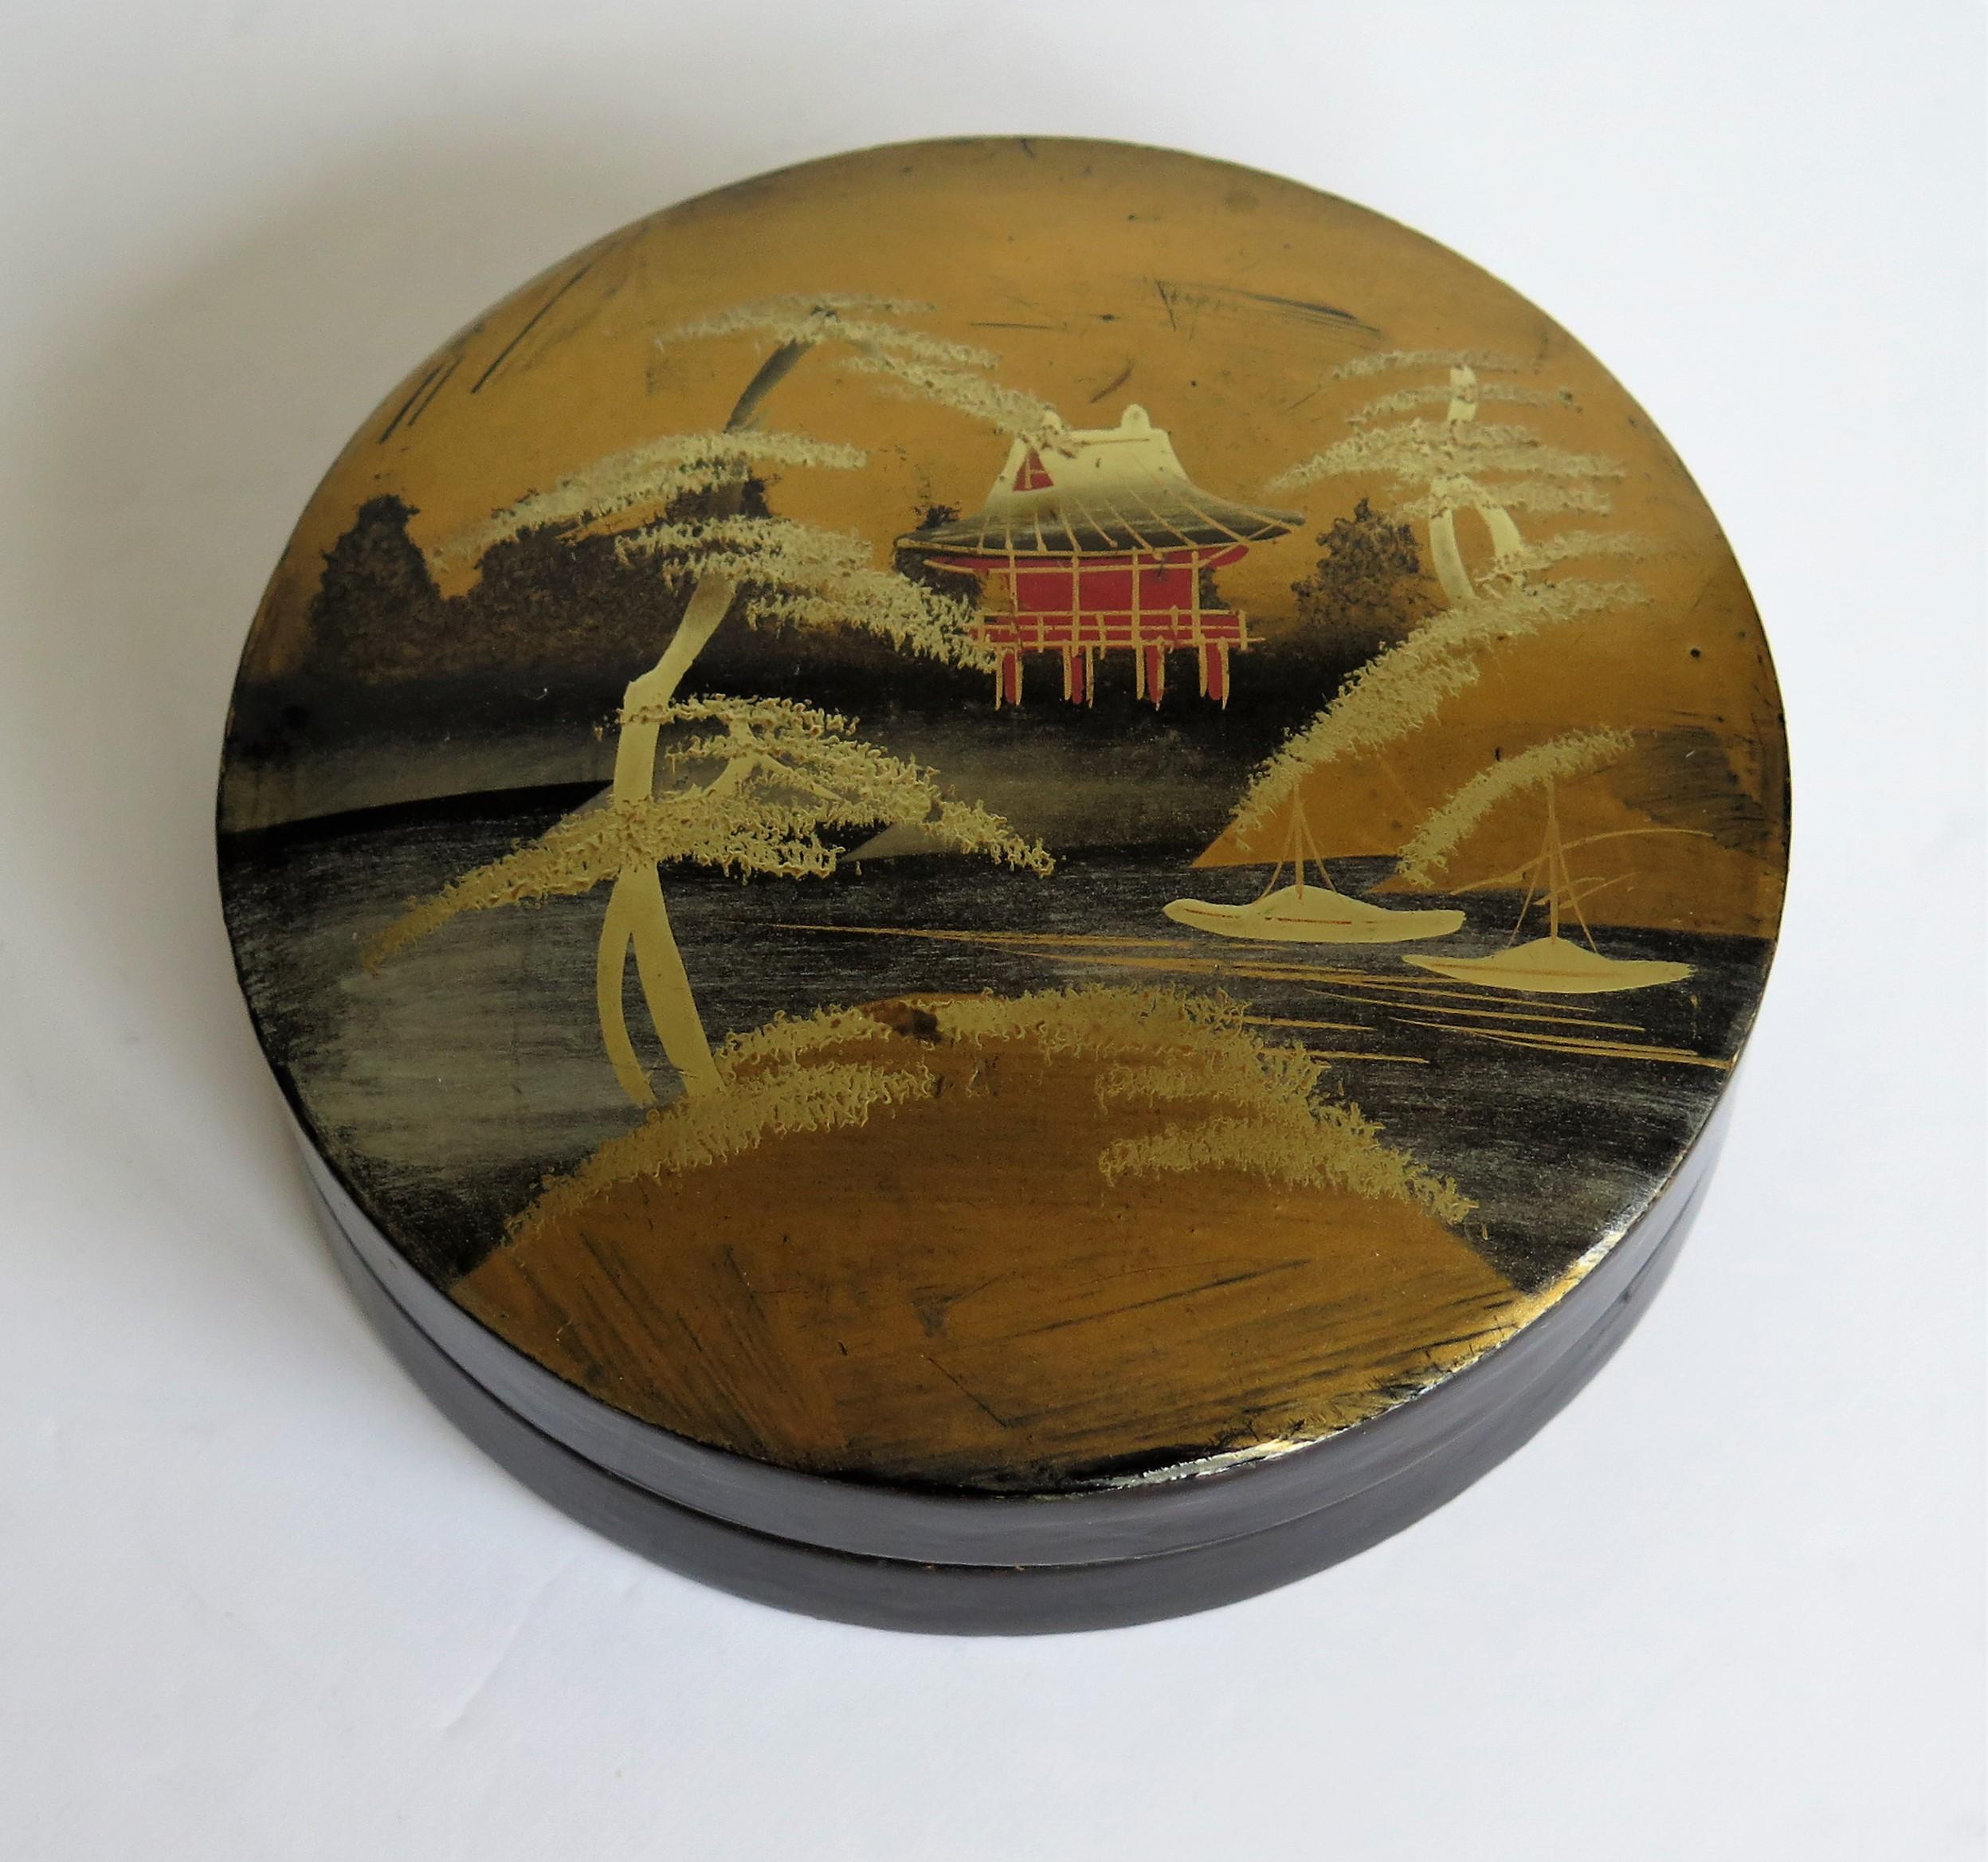 This is a beautiful papier mâché, circular lacquered lidded box, which we attribute to being made in Japan, very early in the 20th century, late Meiji period, circa 1900.

This is a very decorative box with a delicately hand painted waterside